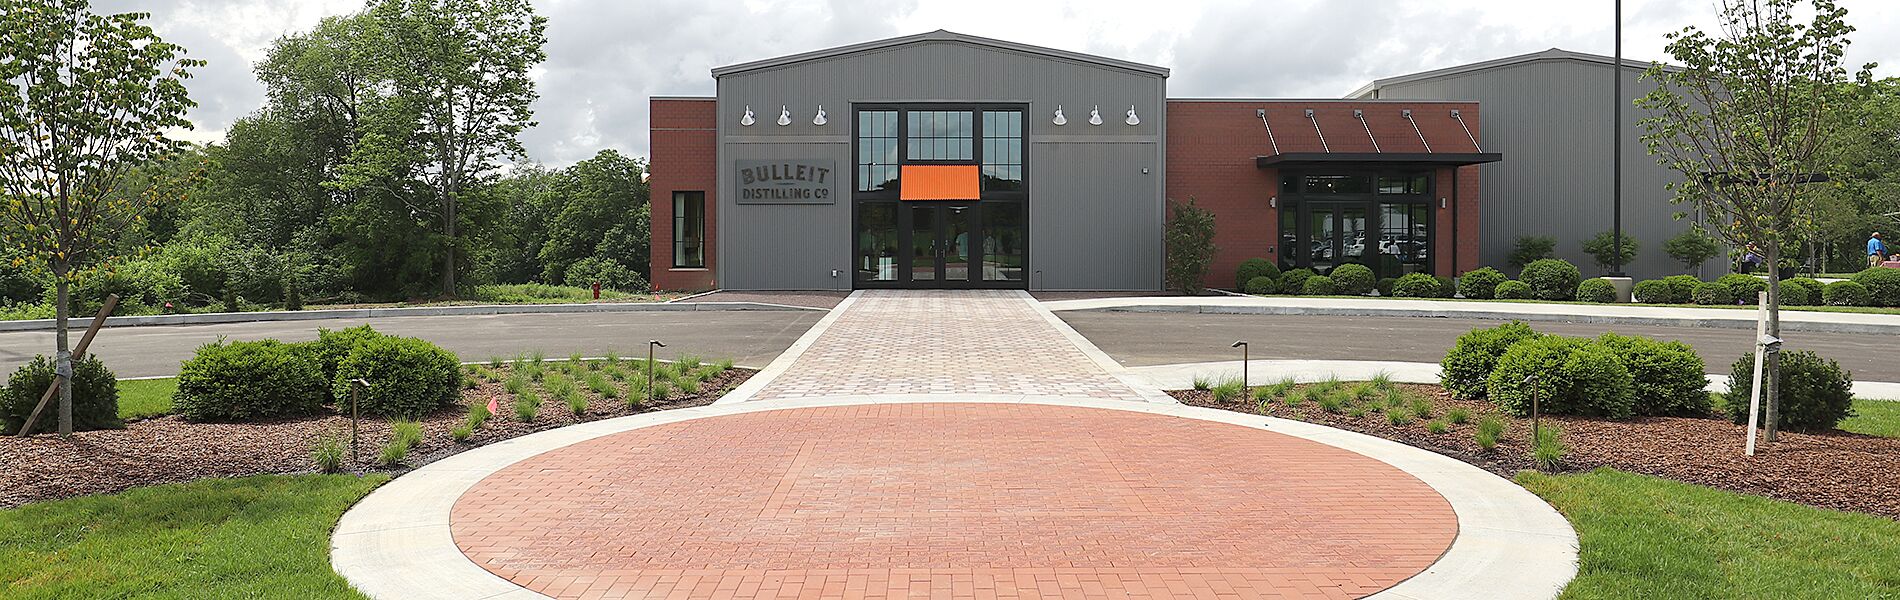 The Bulleit Distilling Co. Visitor Experience is opening Tuesday, June 25th. Photo Courtesy Bulleit Distilling Co.